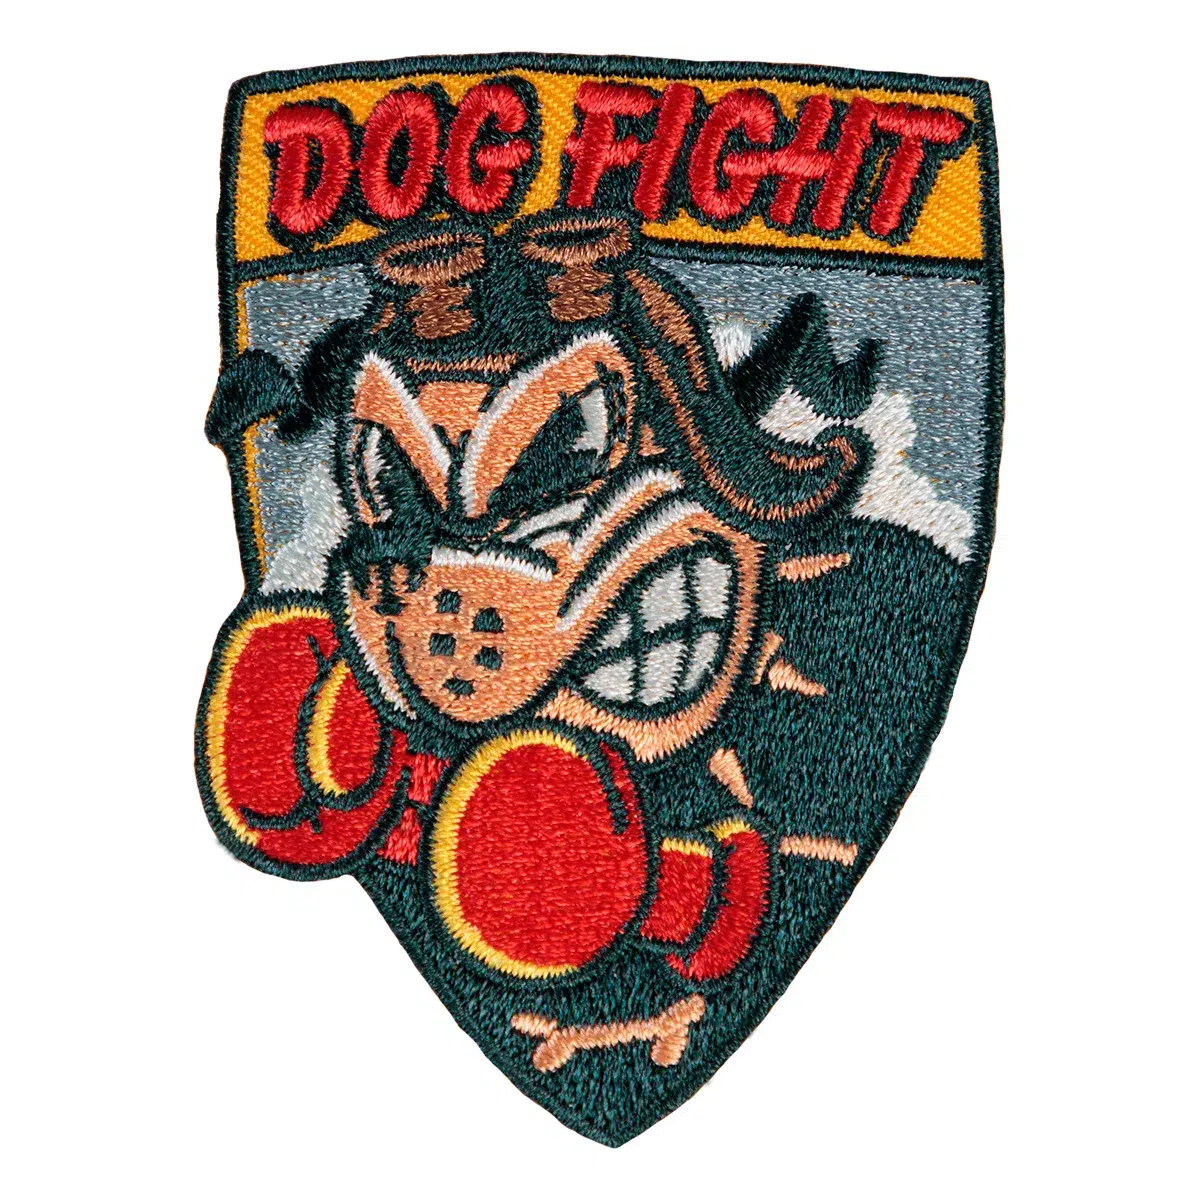 Call of Duty: Patch Set "Nose Art" Image 2